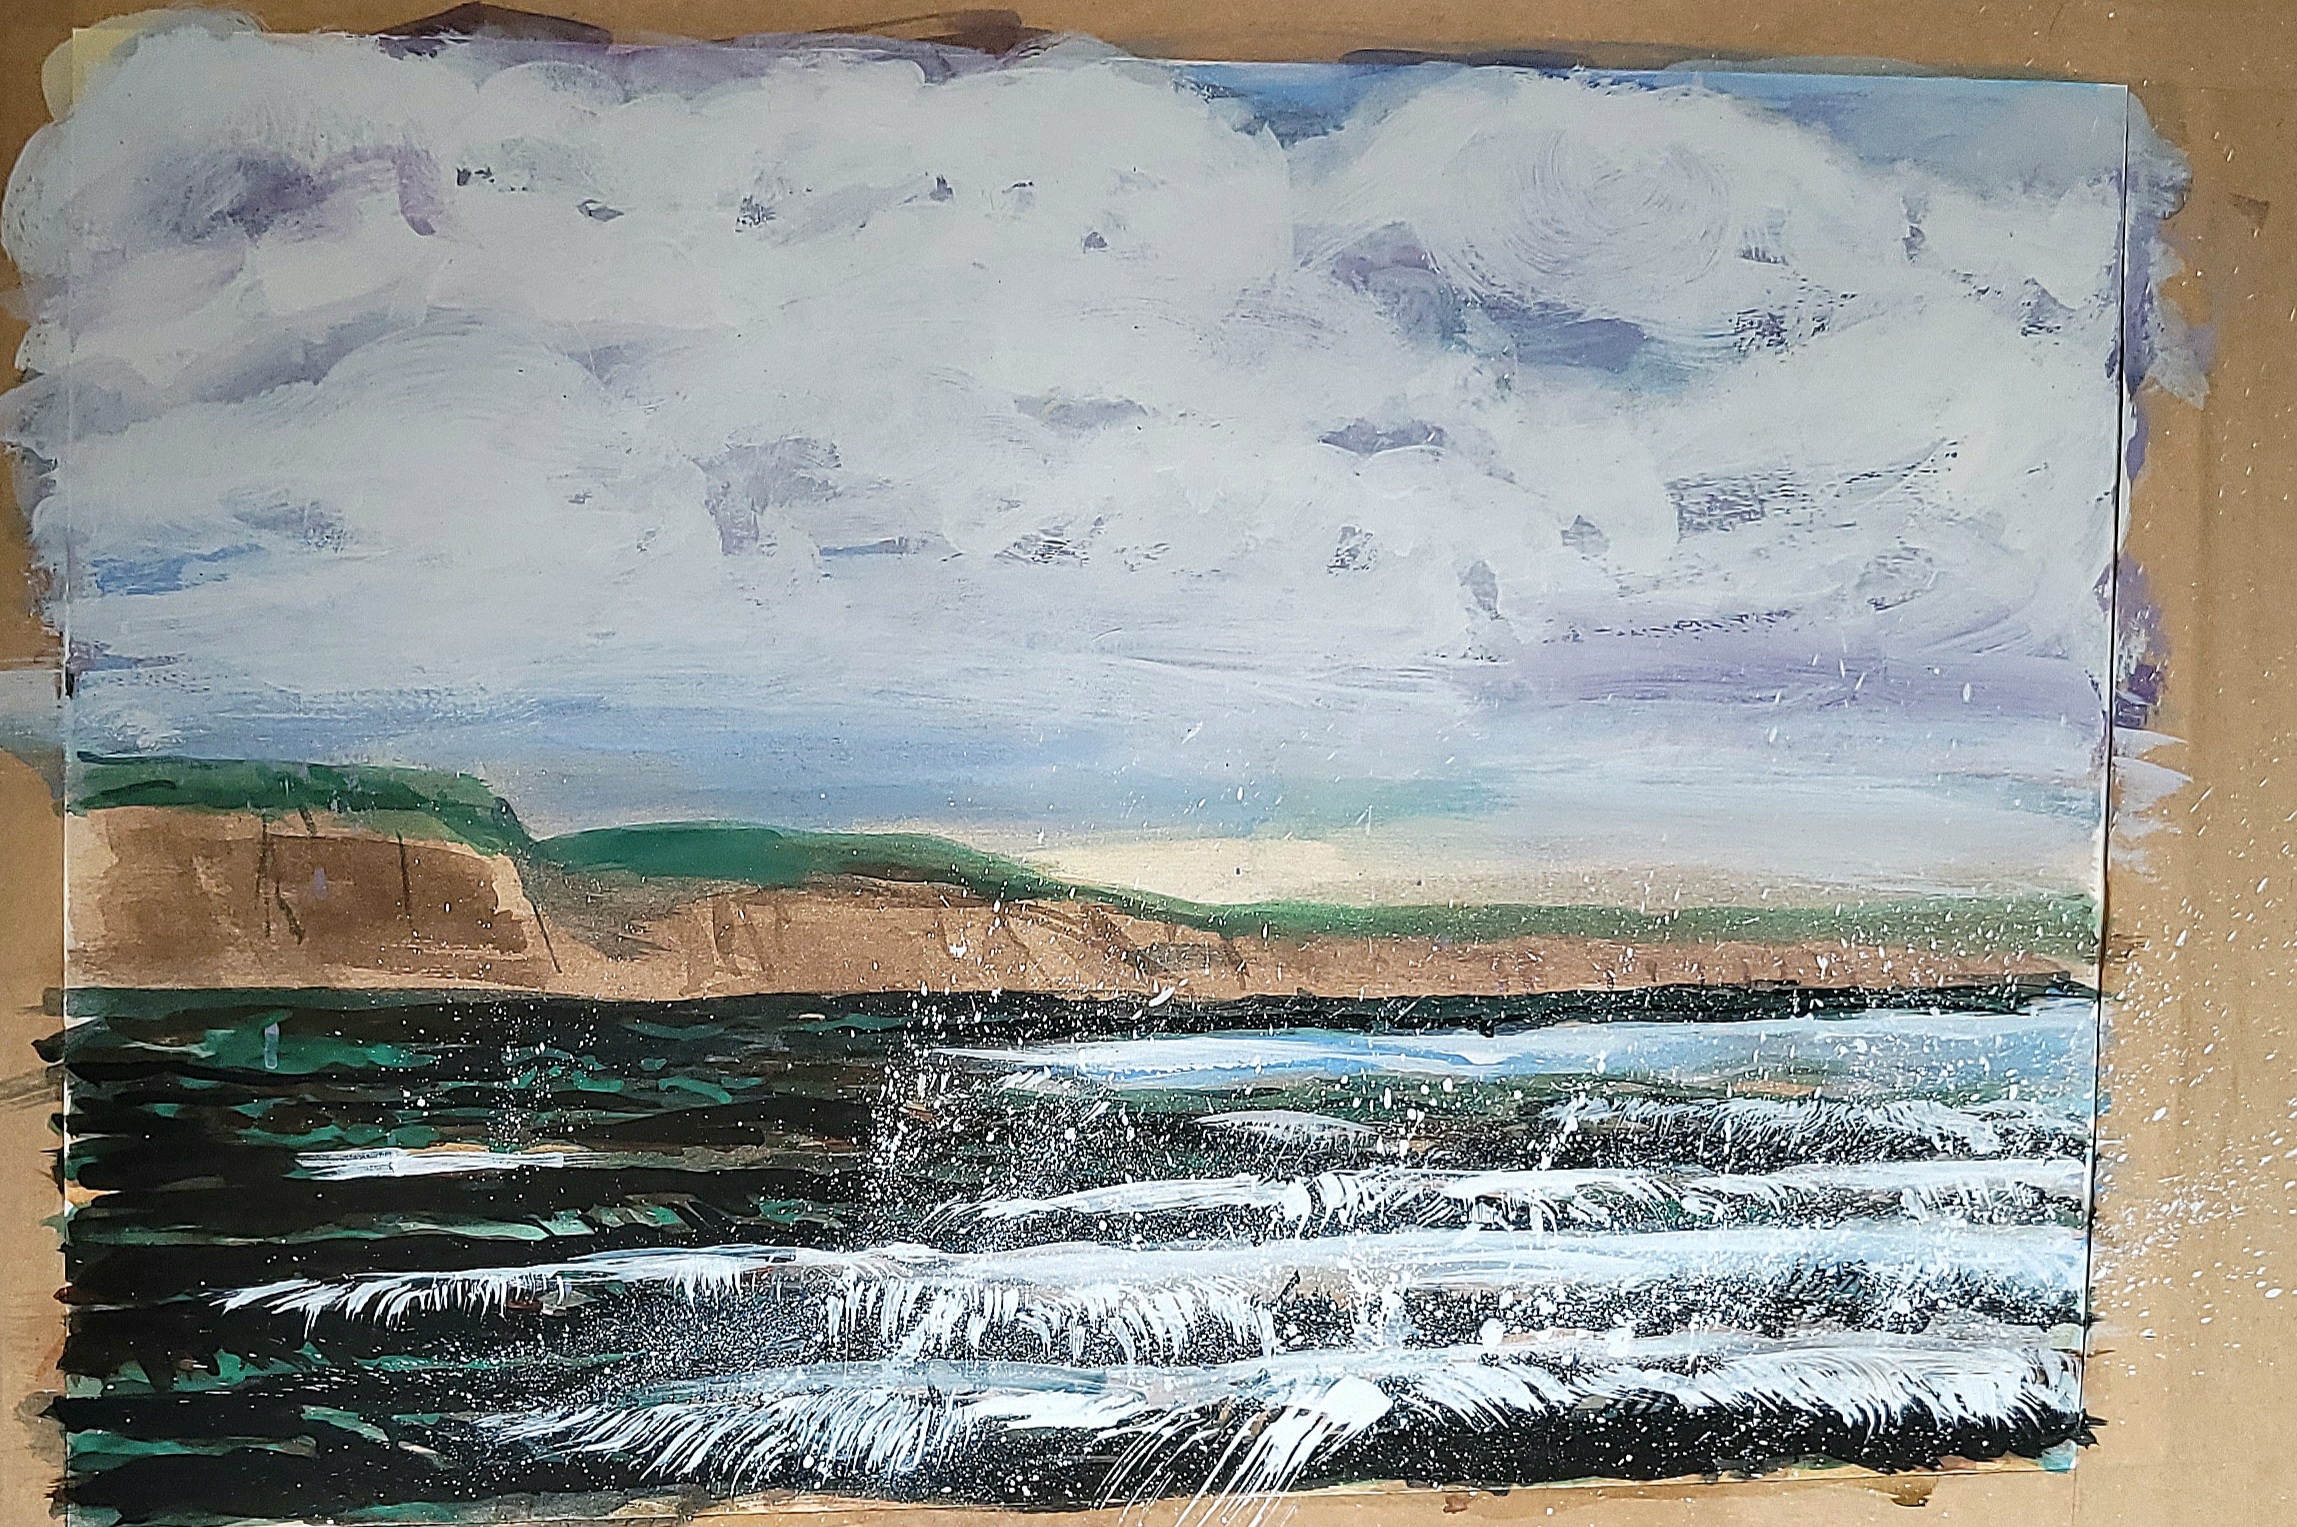 Incoming Tide loosely based on East Yorkshire Coastline